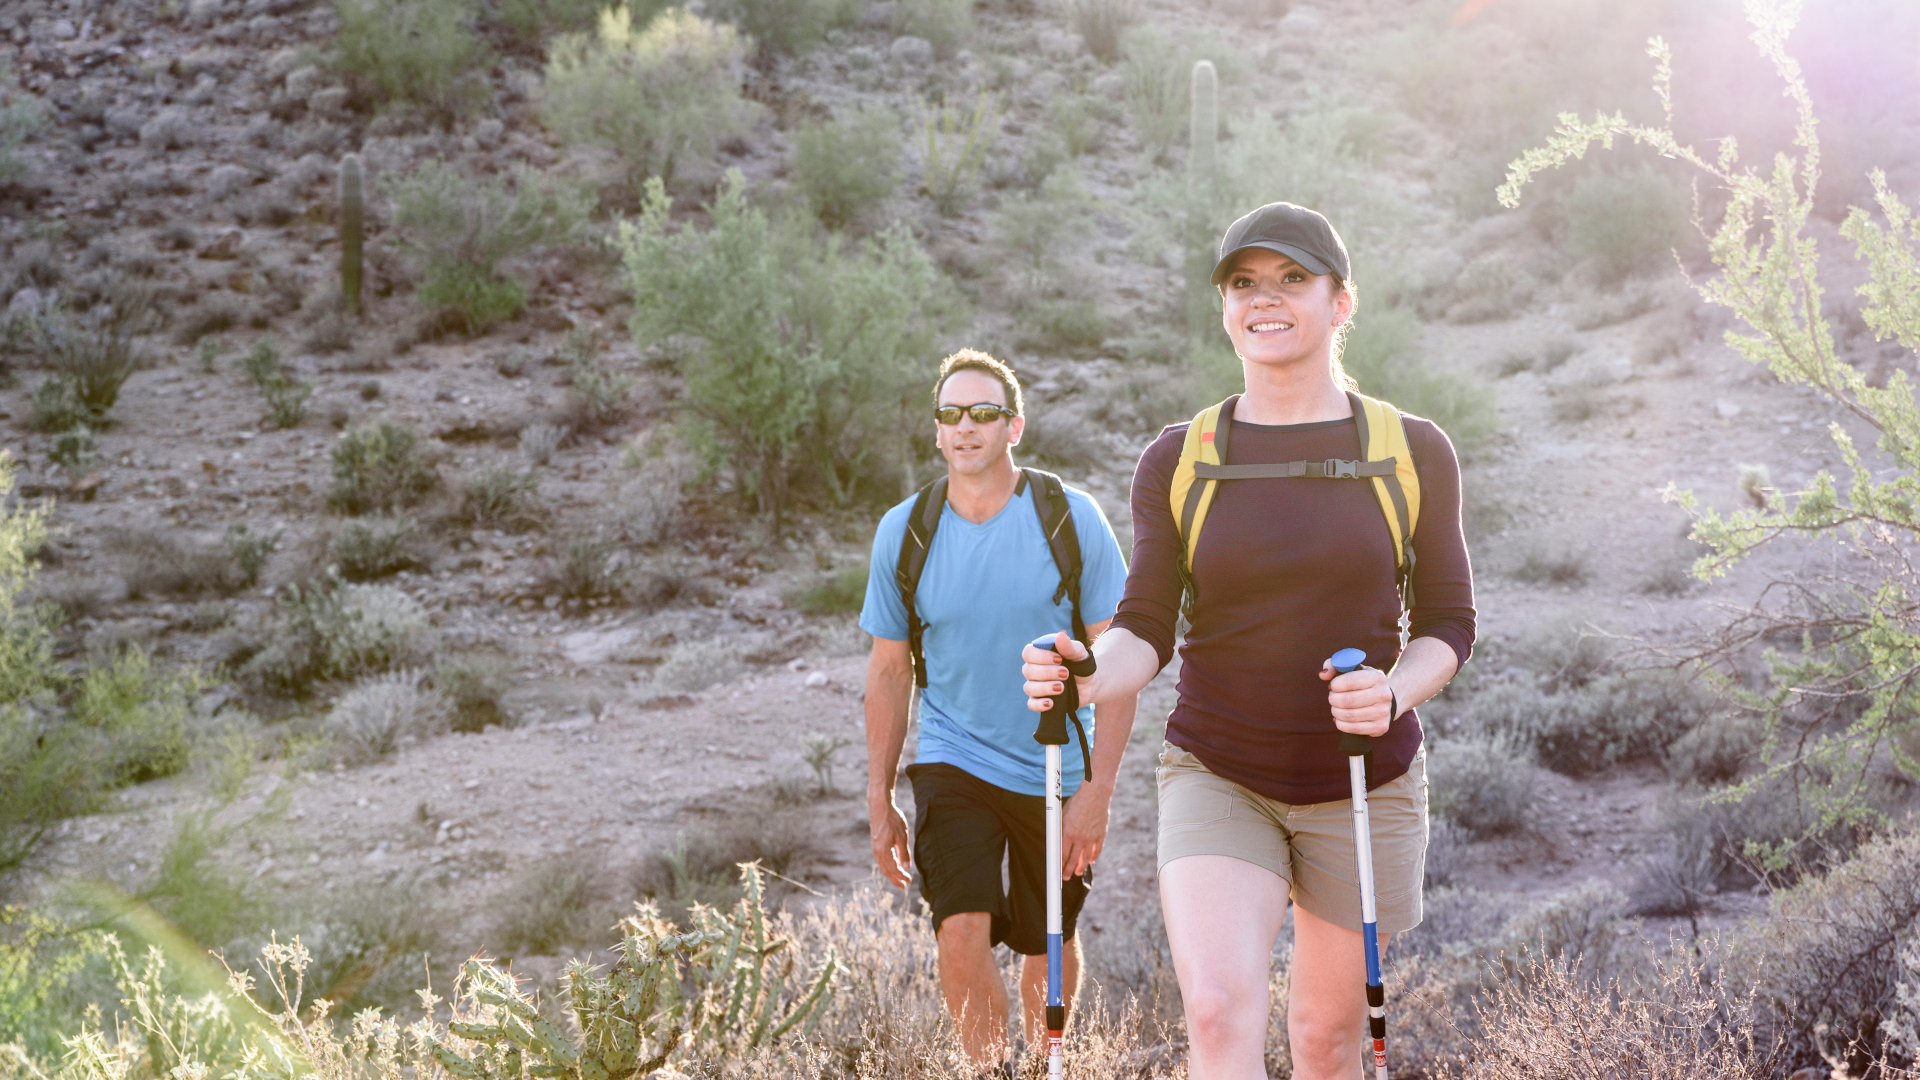 Best summer hiking clothes: What to wear in the heat - Reviewed